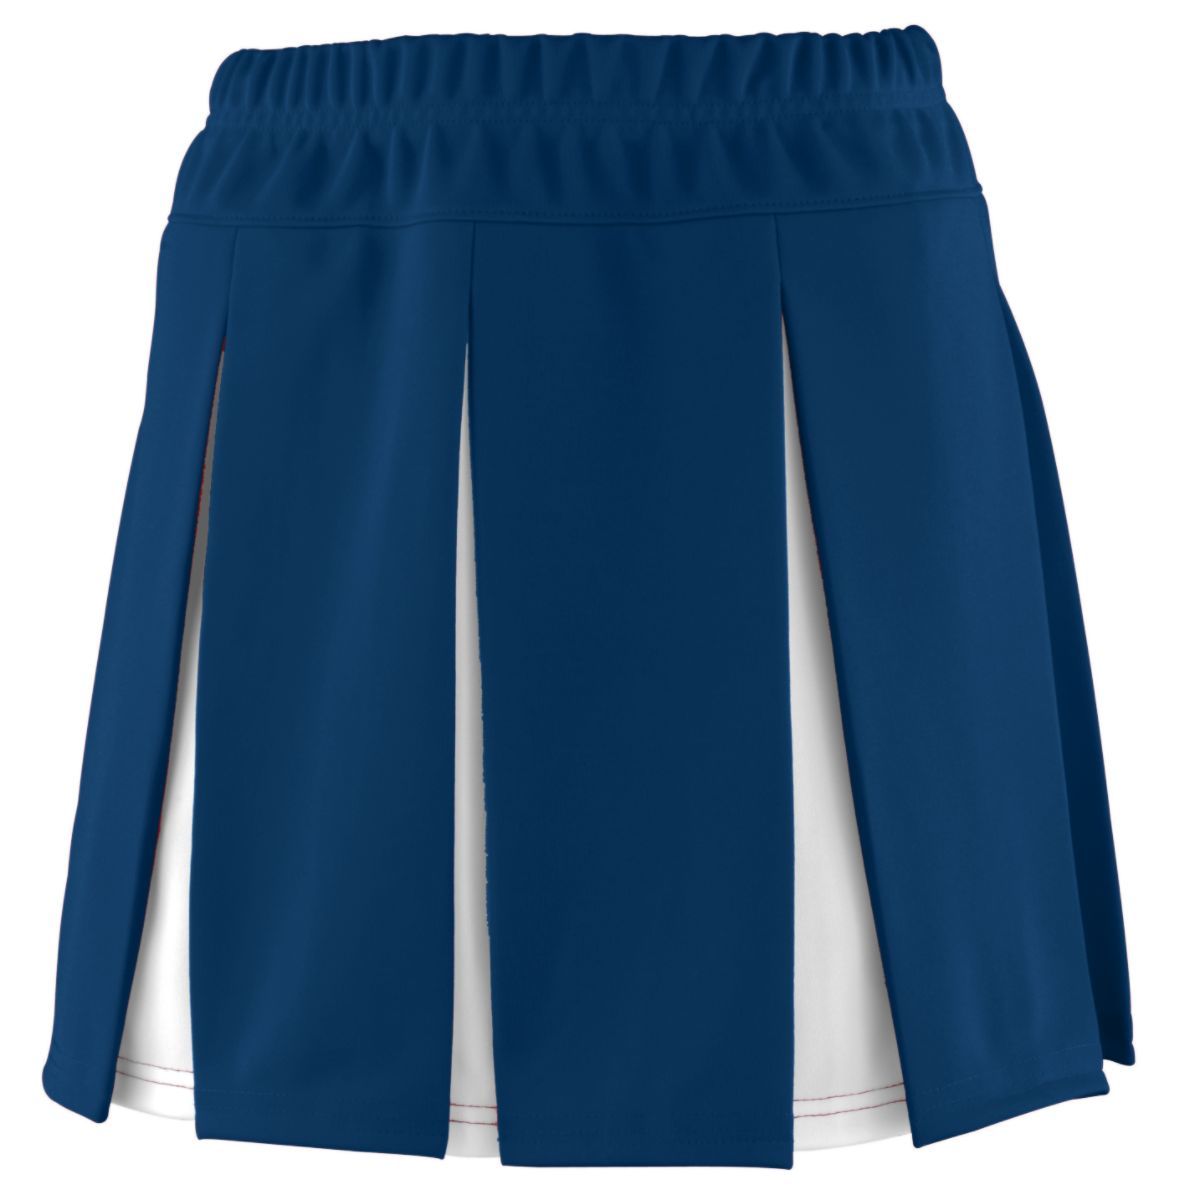 Augusta Sportswear Girls Liberty Skirt in Navy/White  -Part of the Girls, Augusta-Products, Cheer product lines at KanaleyCreations.com